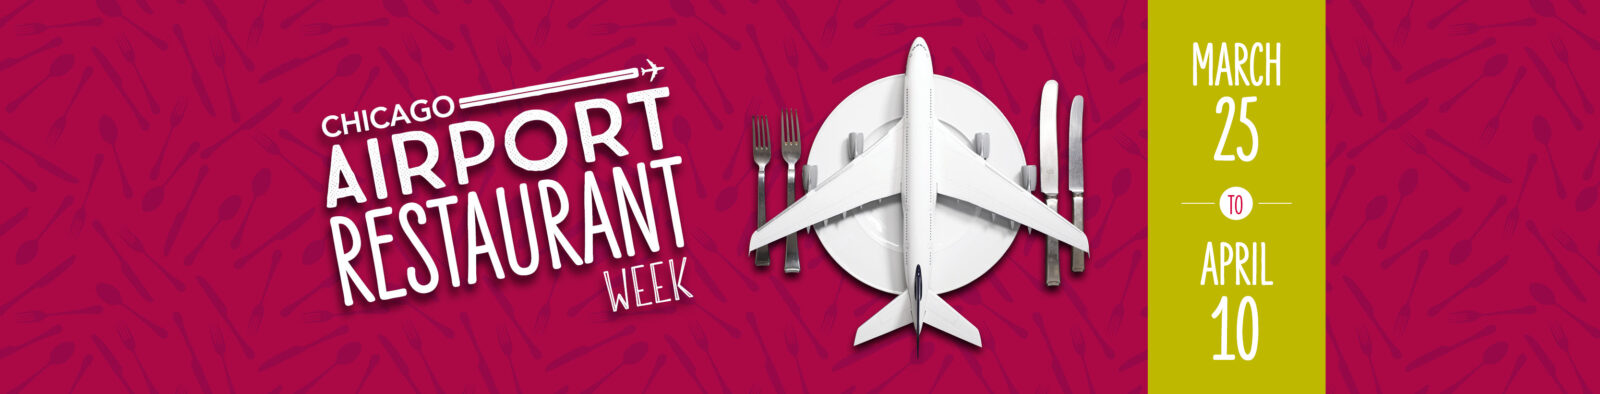 Restaurant Week at ORD & Midway Airports